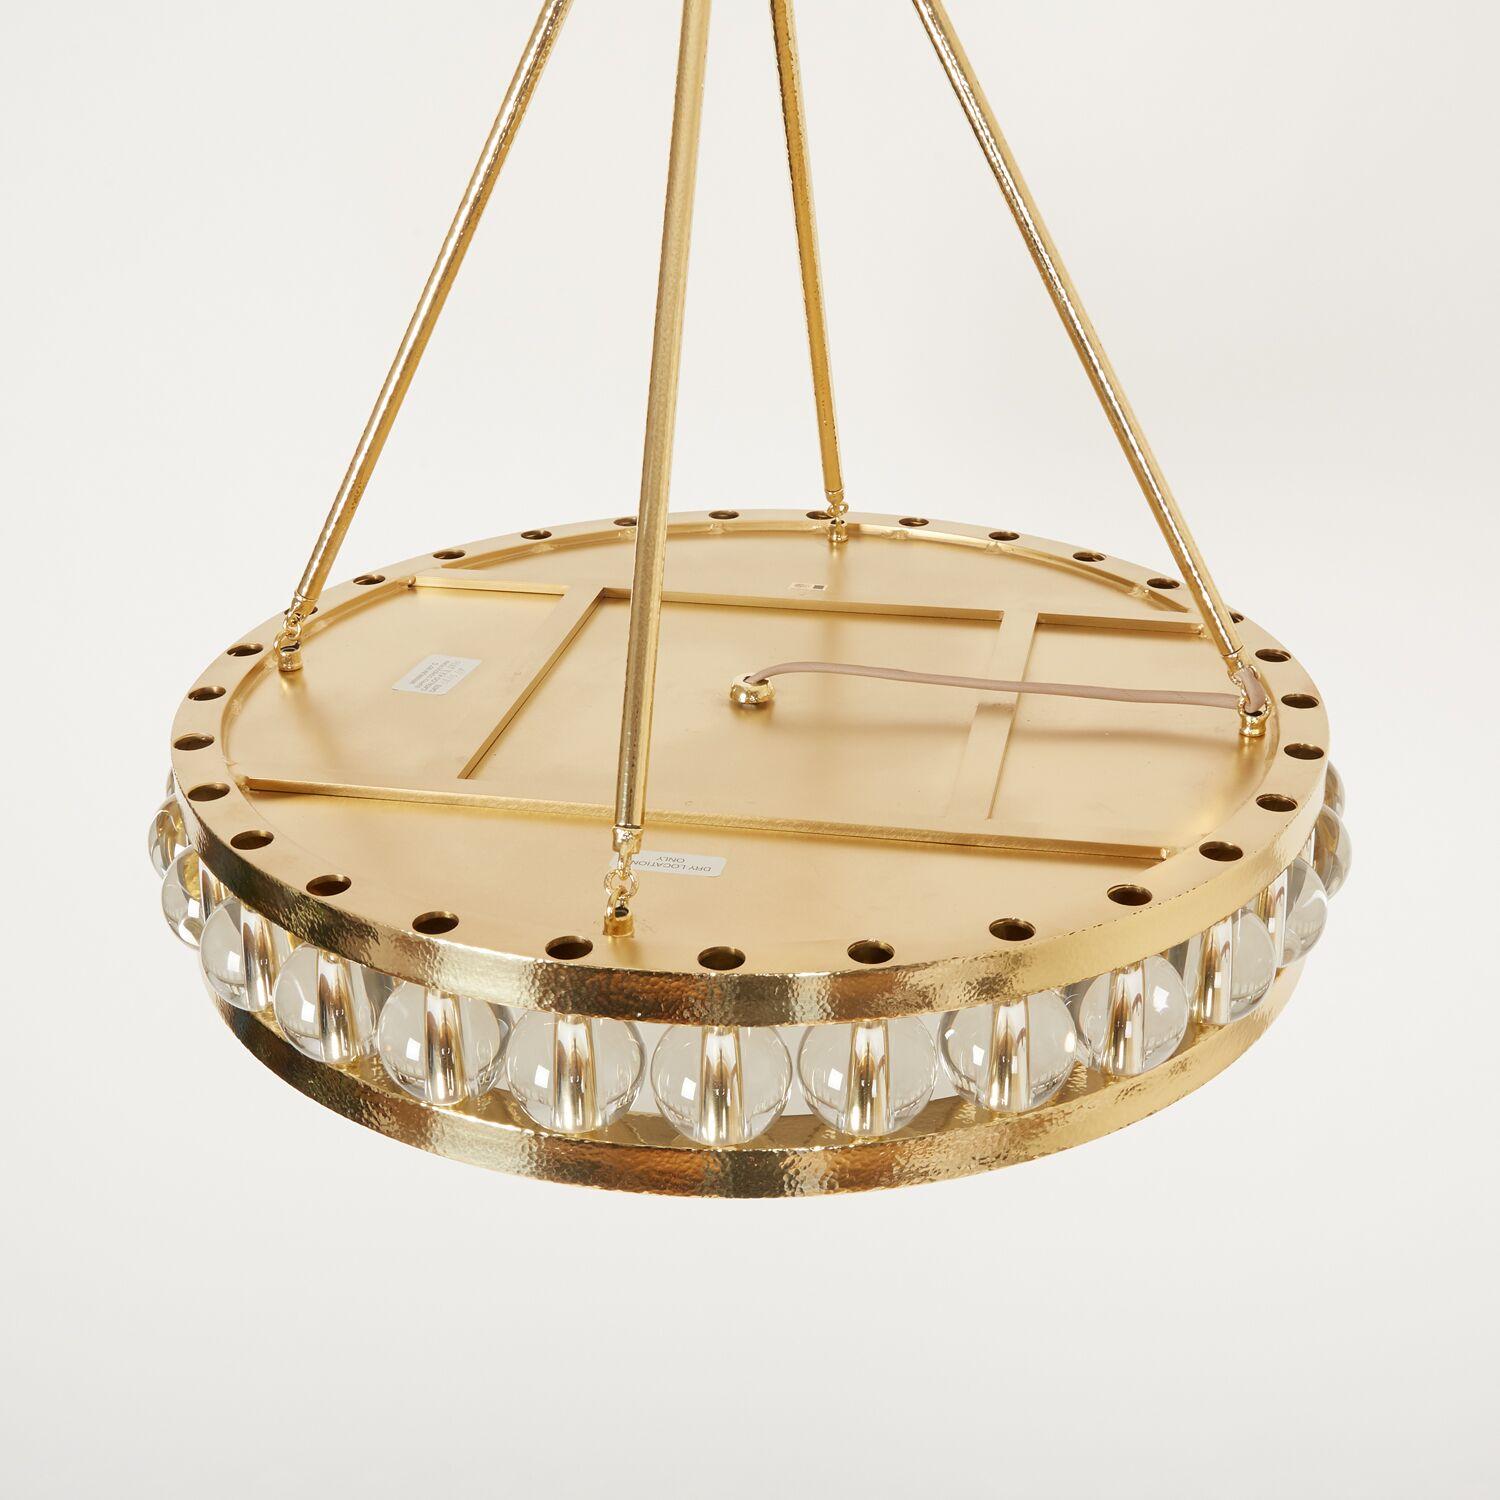 American Hammered Tambour Pendant Light in Brass by David Duncan For Sale